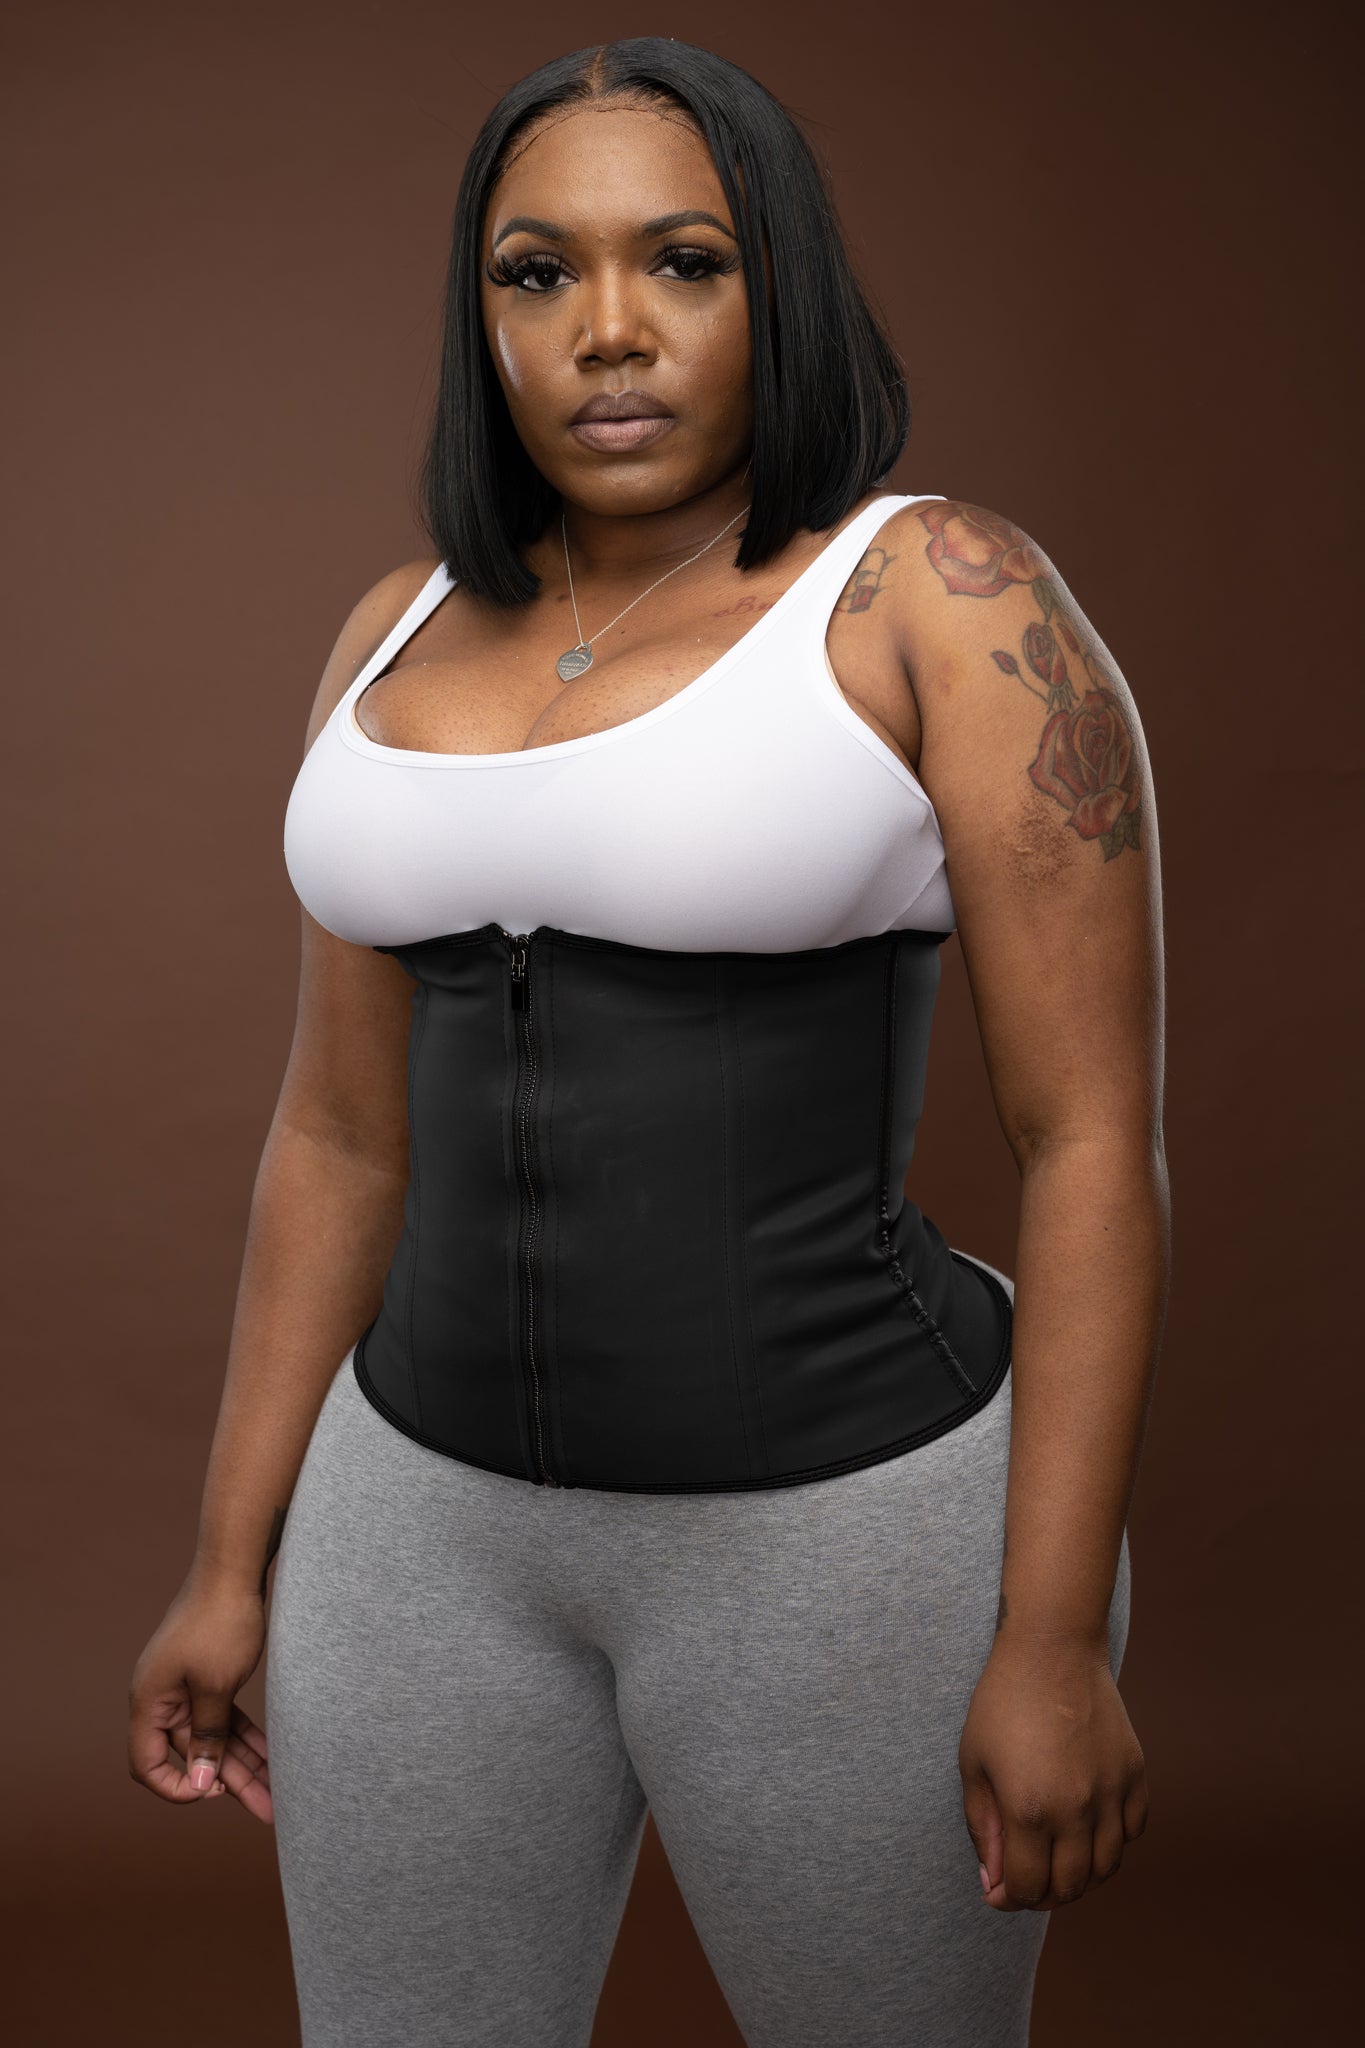 Post Operative Waist Trainer With High Compression And Post Surgery Support  Ideal For Womens Post Operative Care And Slimming From Heijue03, $14.11